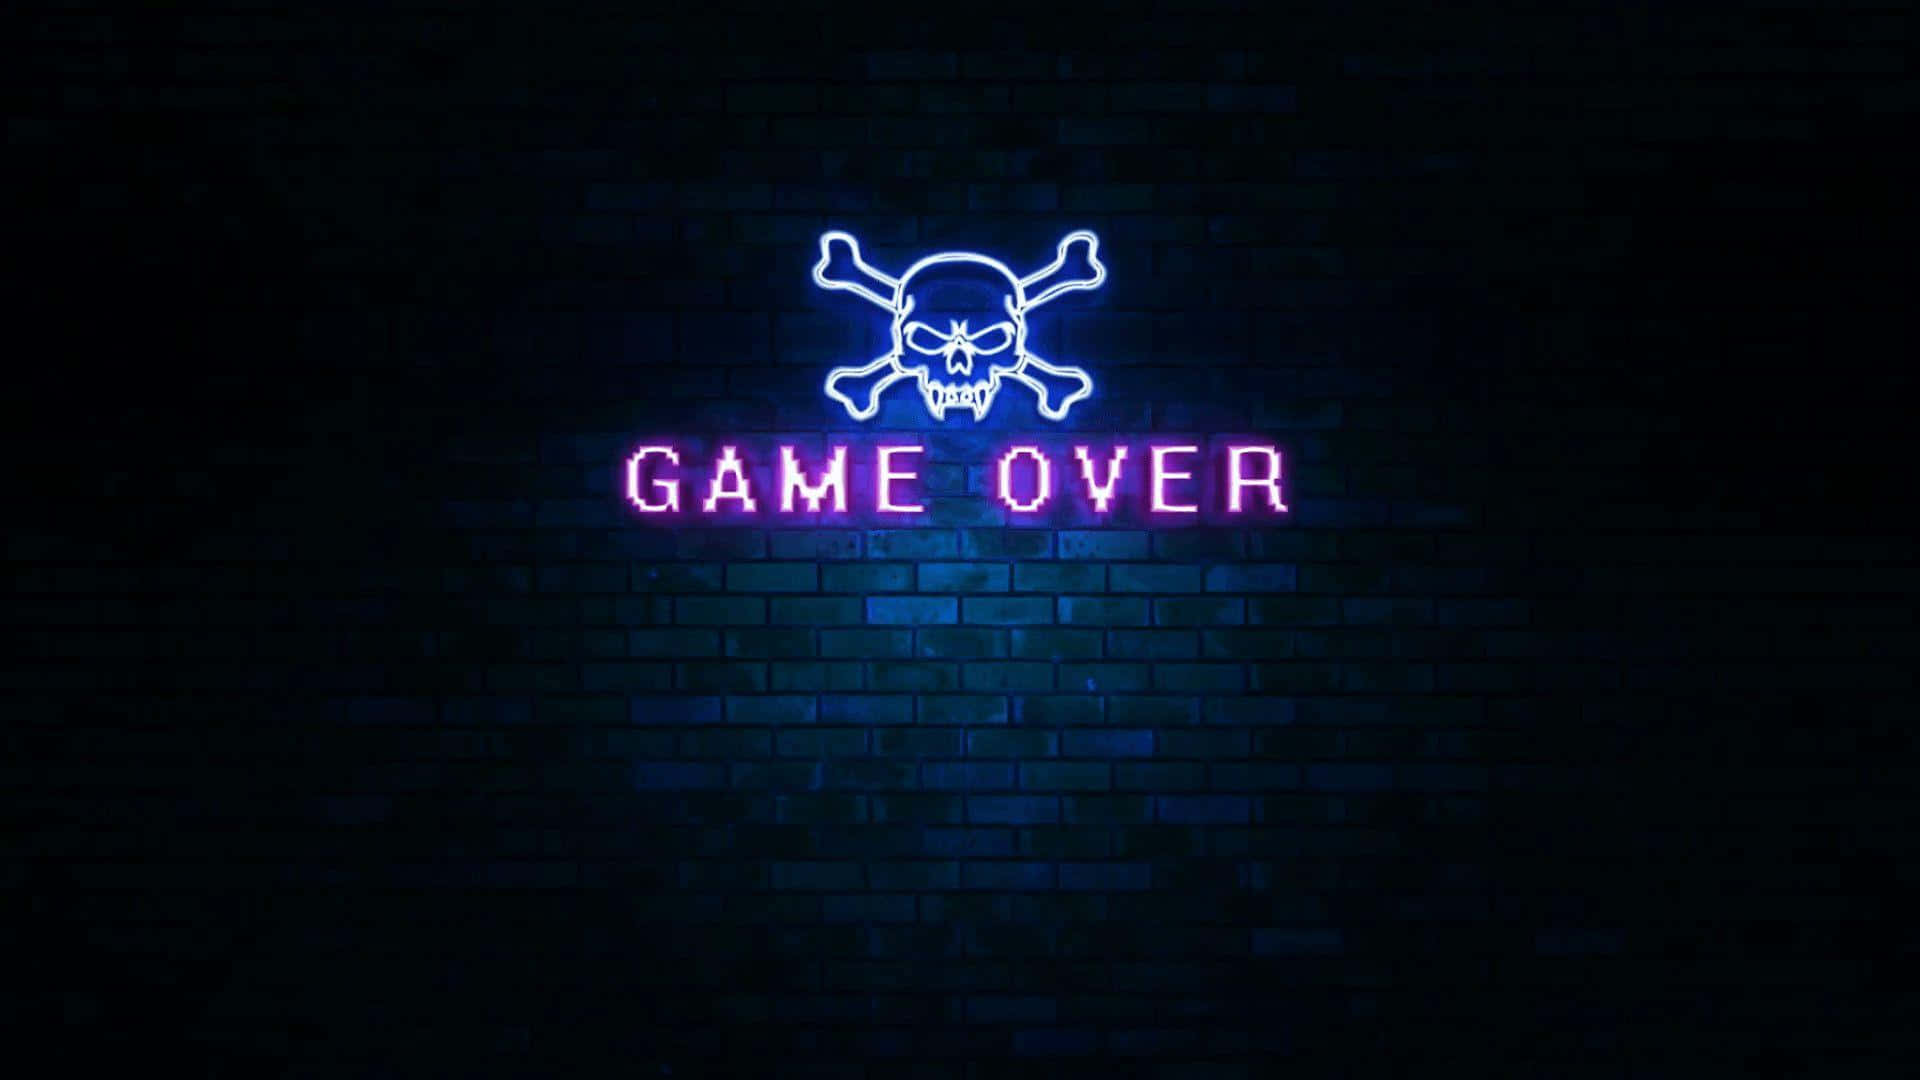 Light up your gaming night with Neon Gaming! Wallpaper